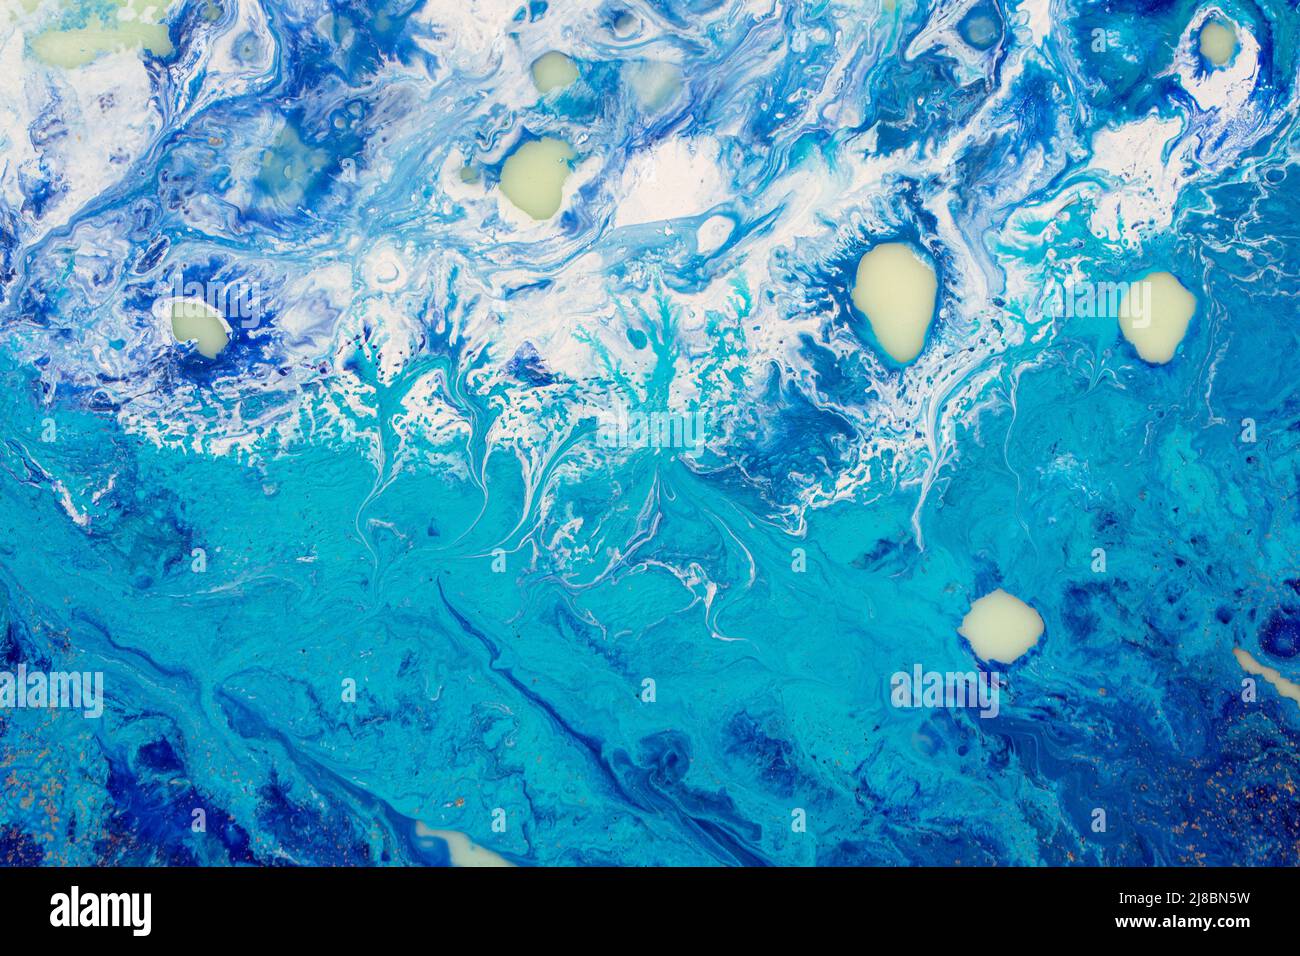 New painting background in your adorable blue tone. Stock Photo